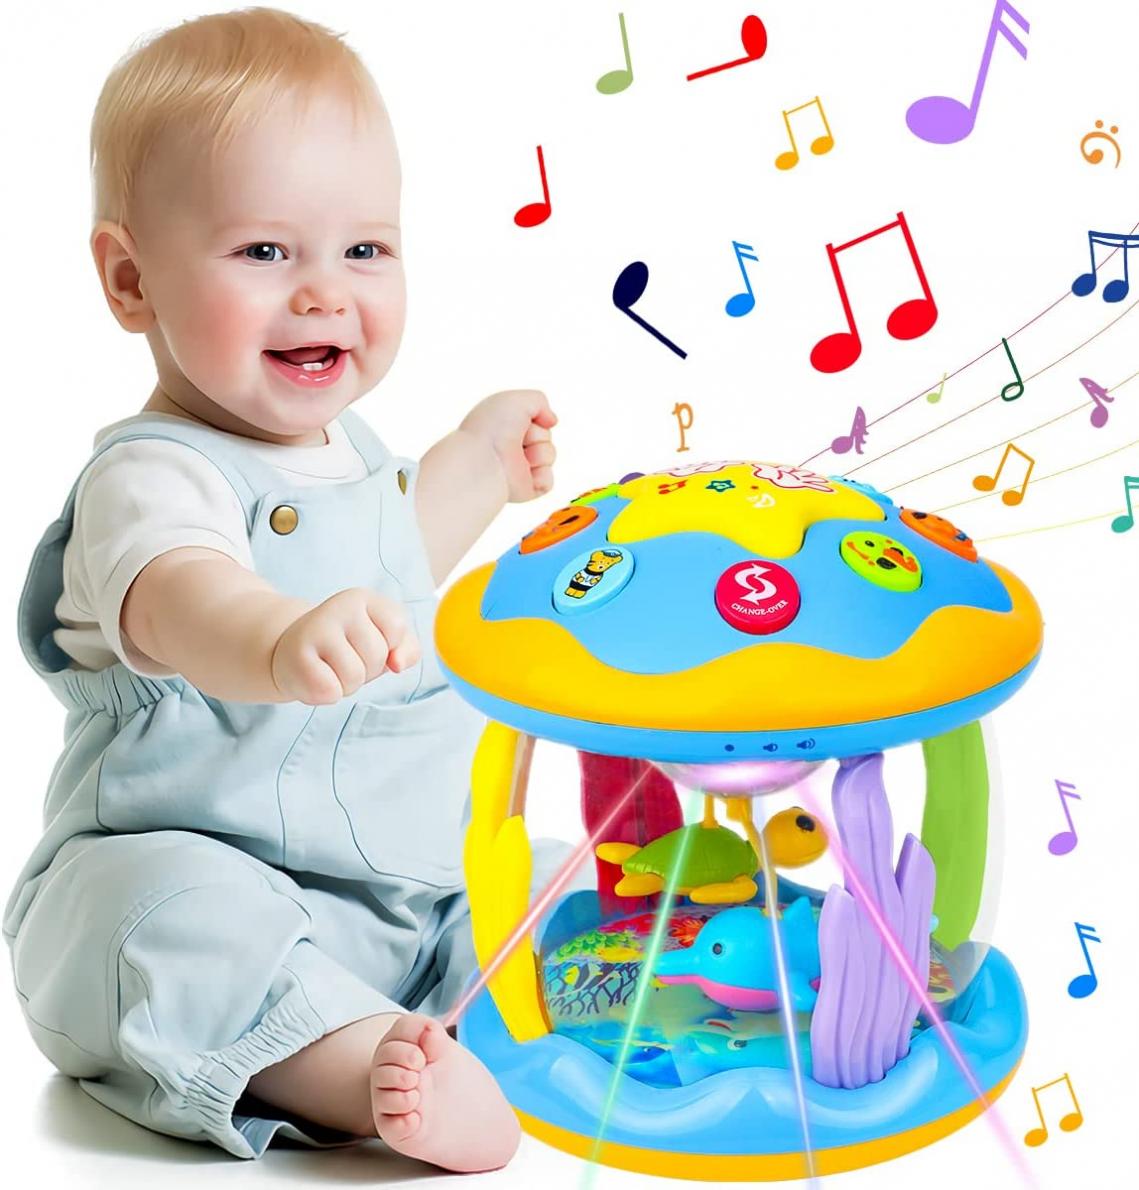 Aboosam Baby Toys 6 to 12 Months - Musical Learning Infant Toys 12-18 Months - Babies Ocean Rotating Light Up Toys for Toddlers 1 2 3+ Years Old Boys Girls Baby Gifts